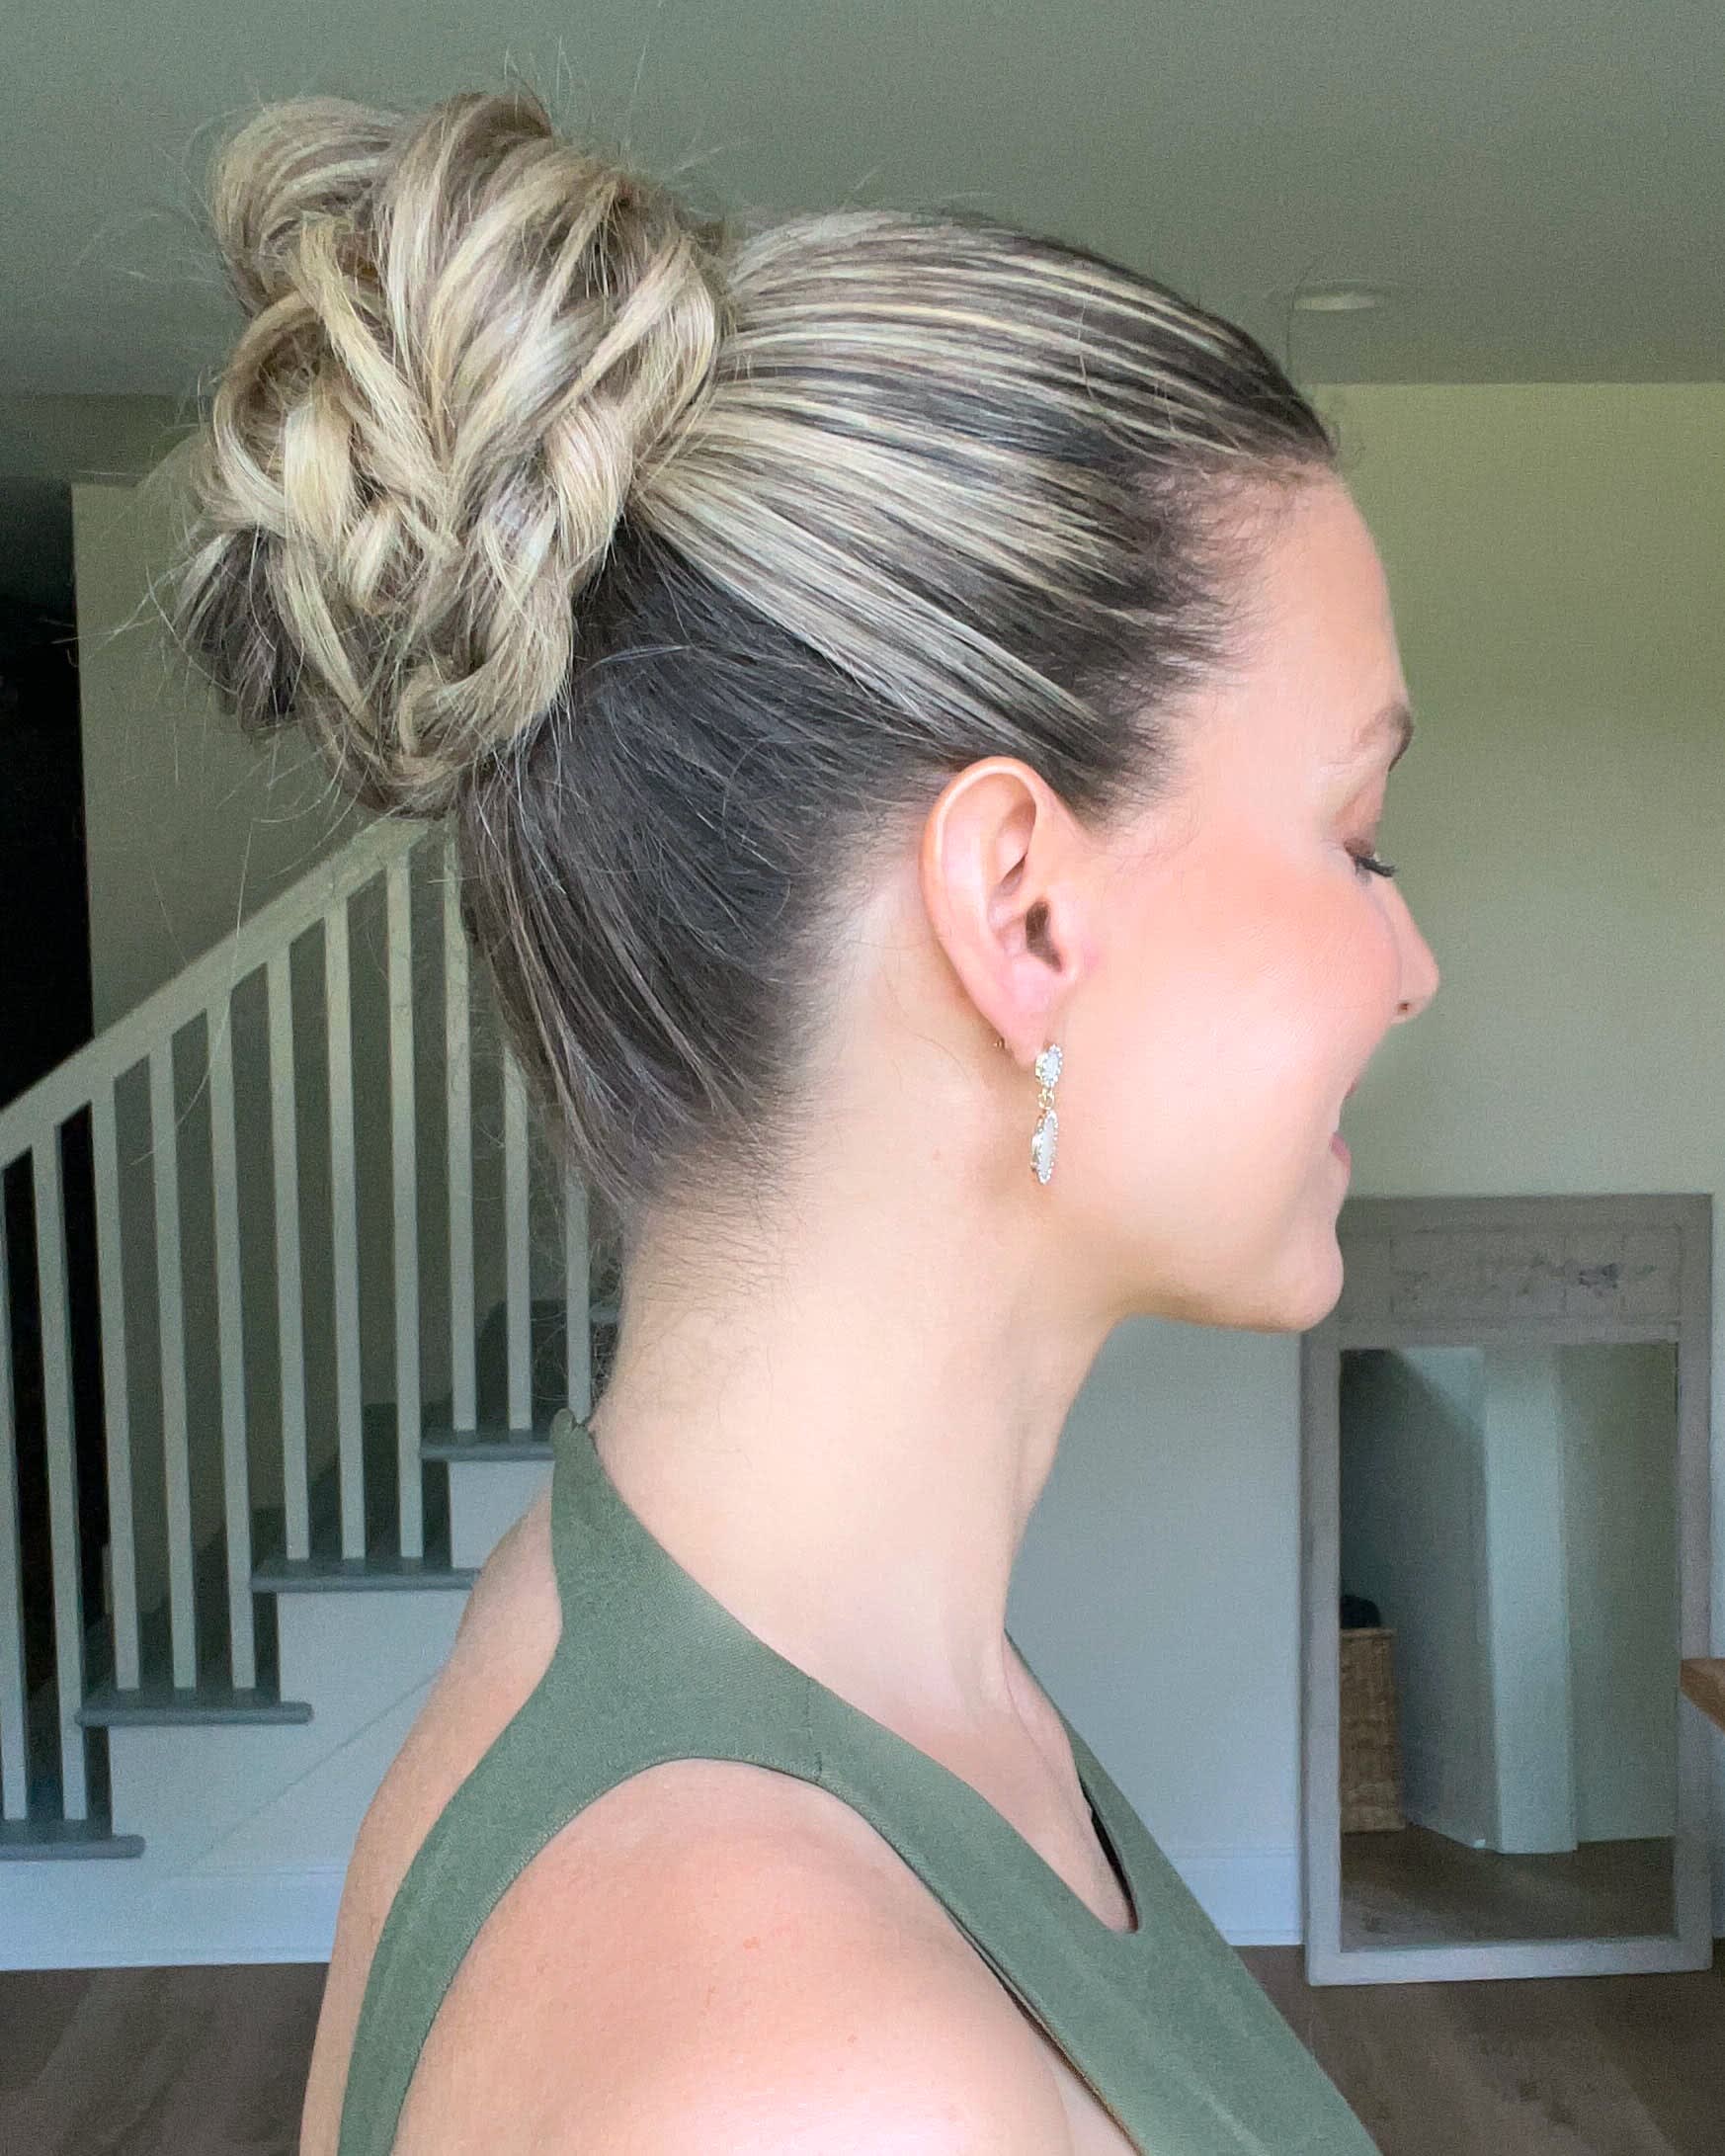 Wedding Prom Updo Tutorial. Formal Hairstyles For Long Hair - YouTube